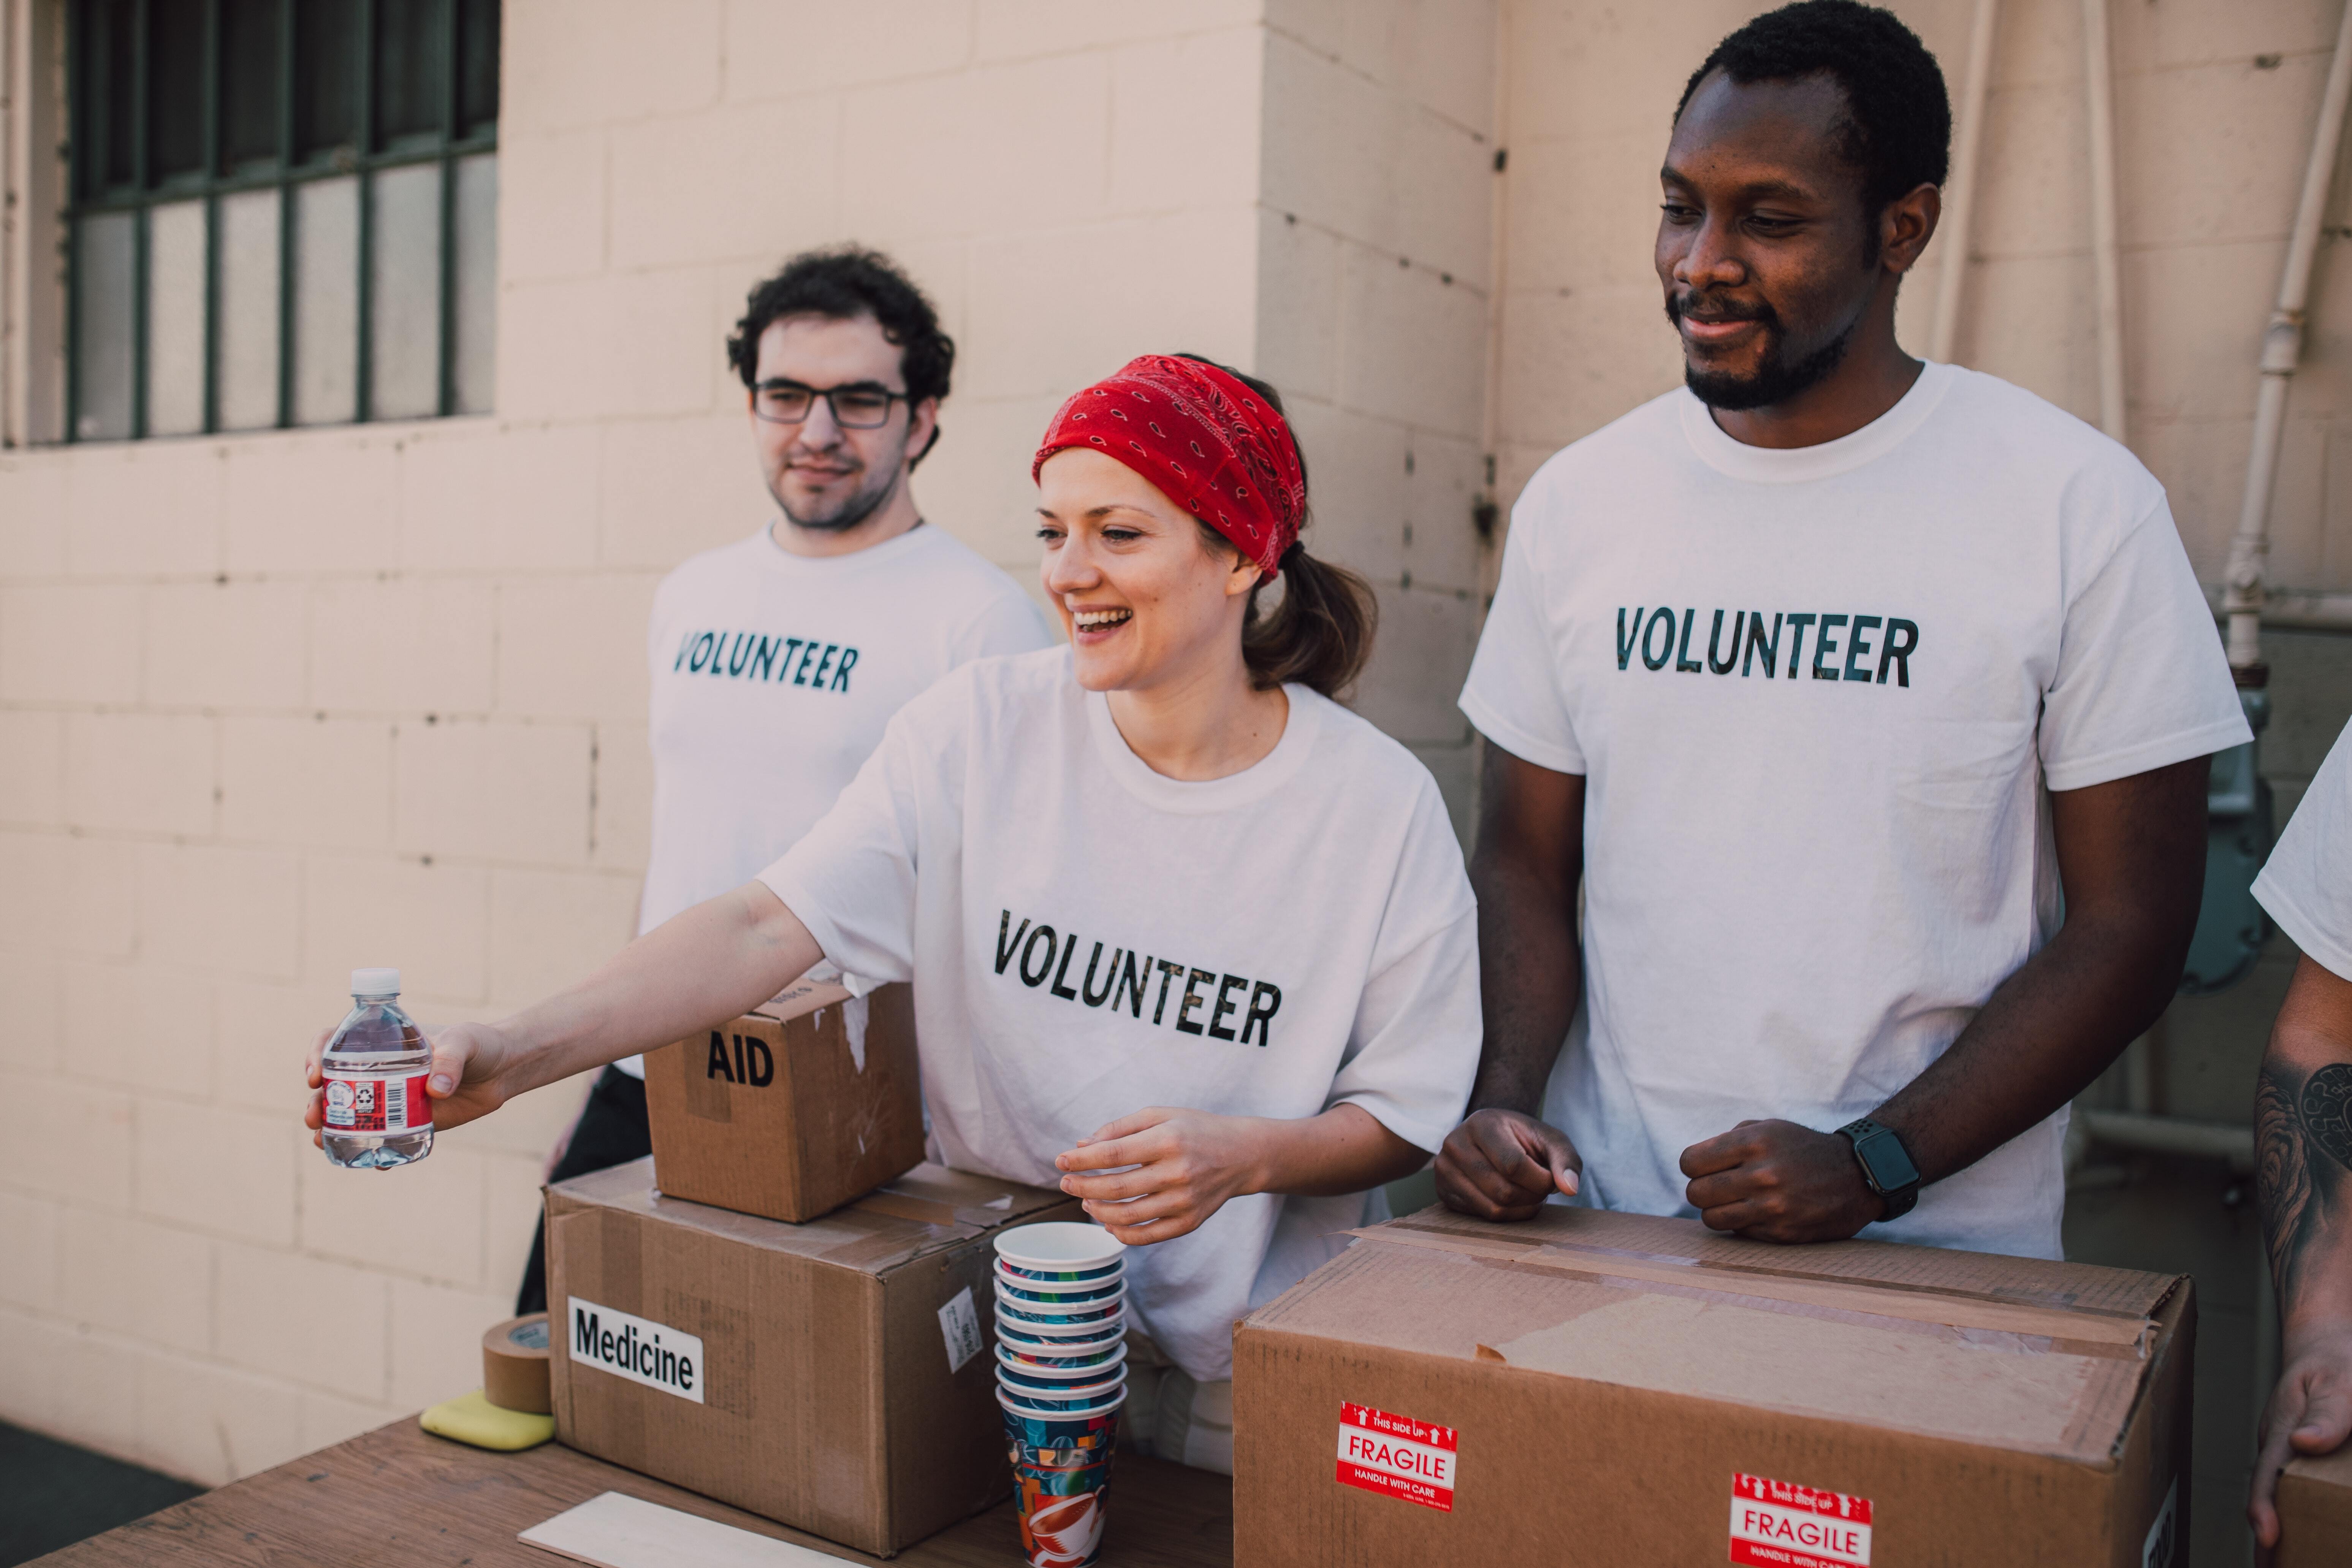 Volunteer Recruitment Ideas: 20 Awesome Ways to Get the Volunteers You Need